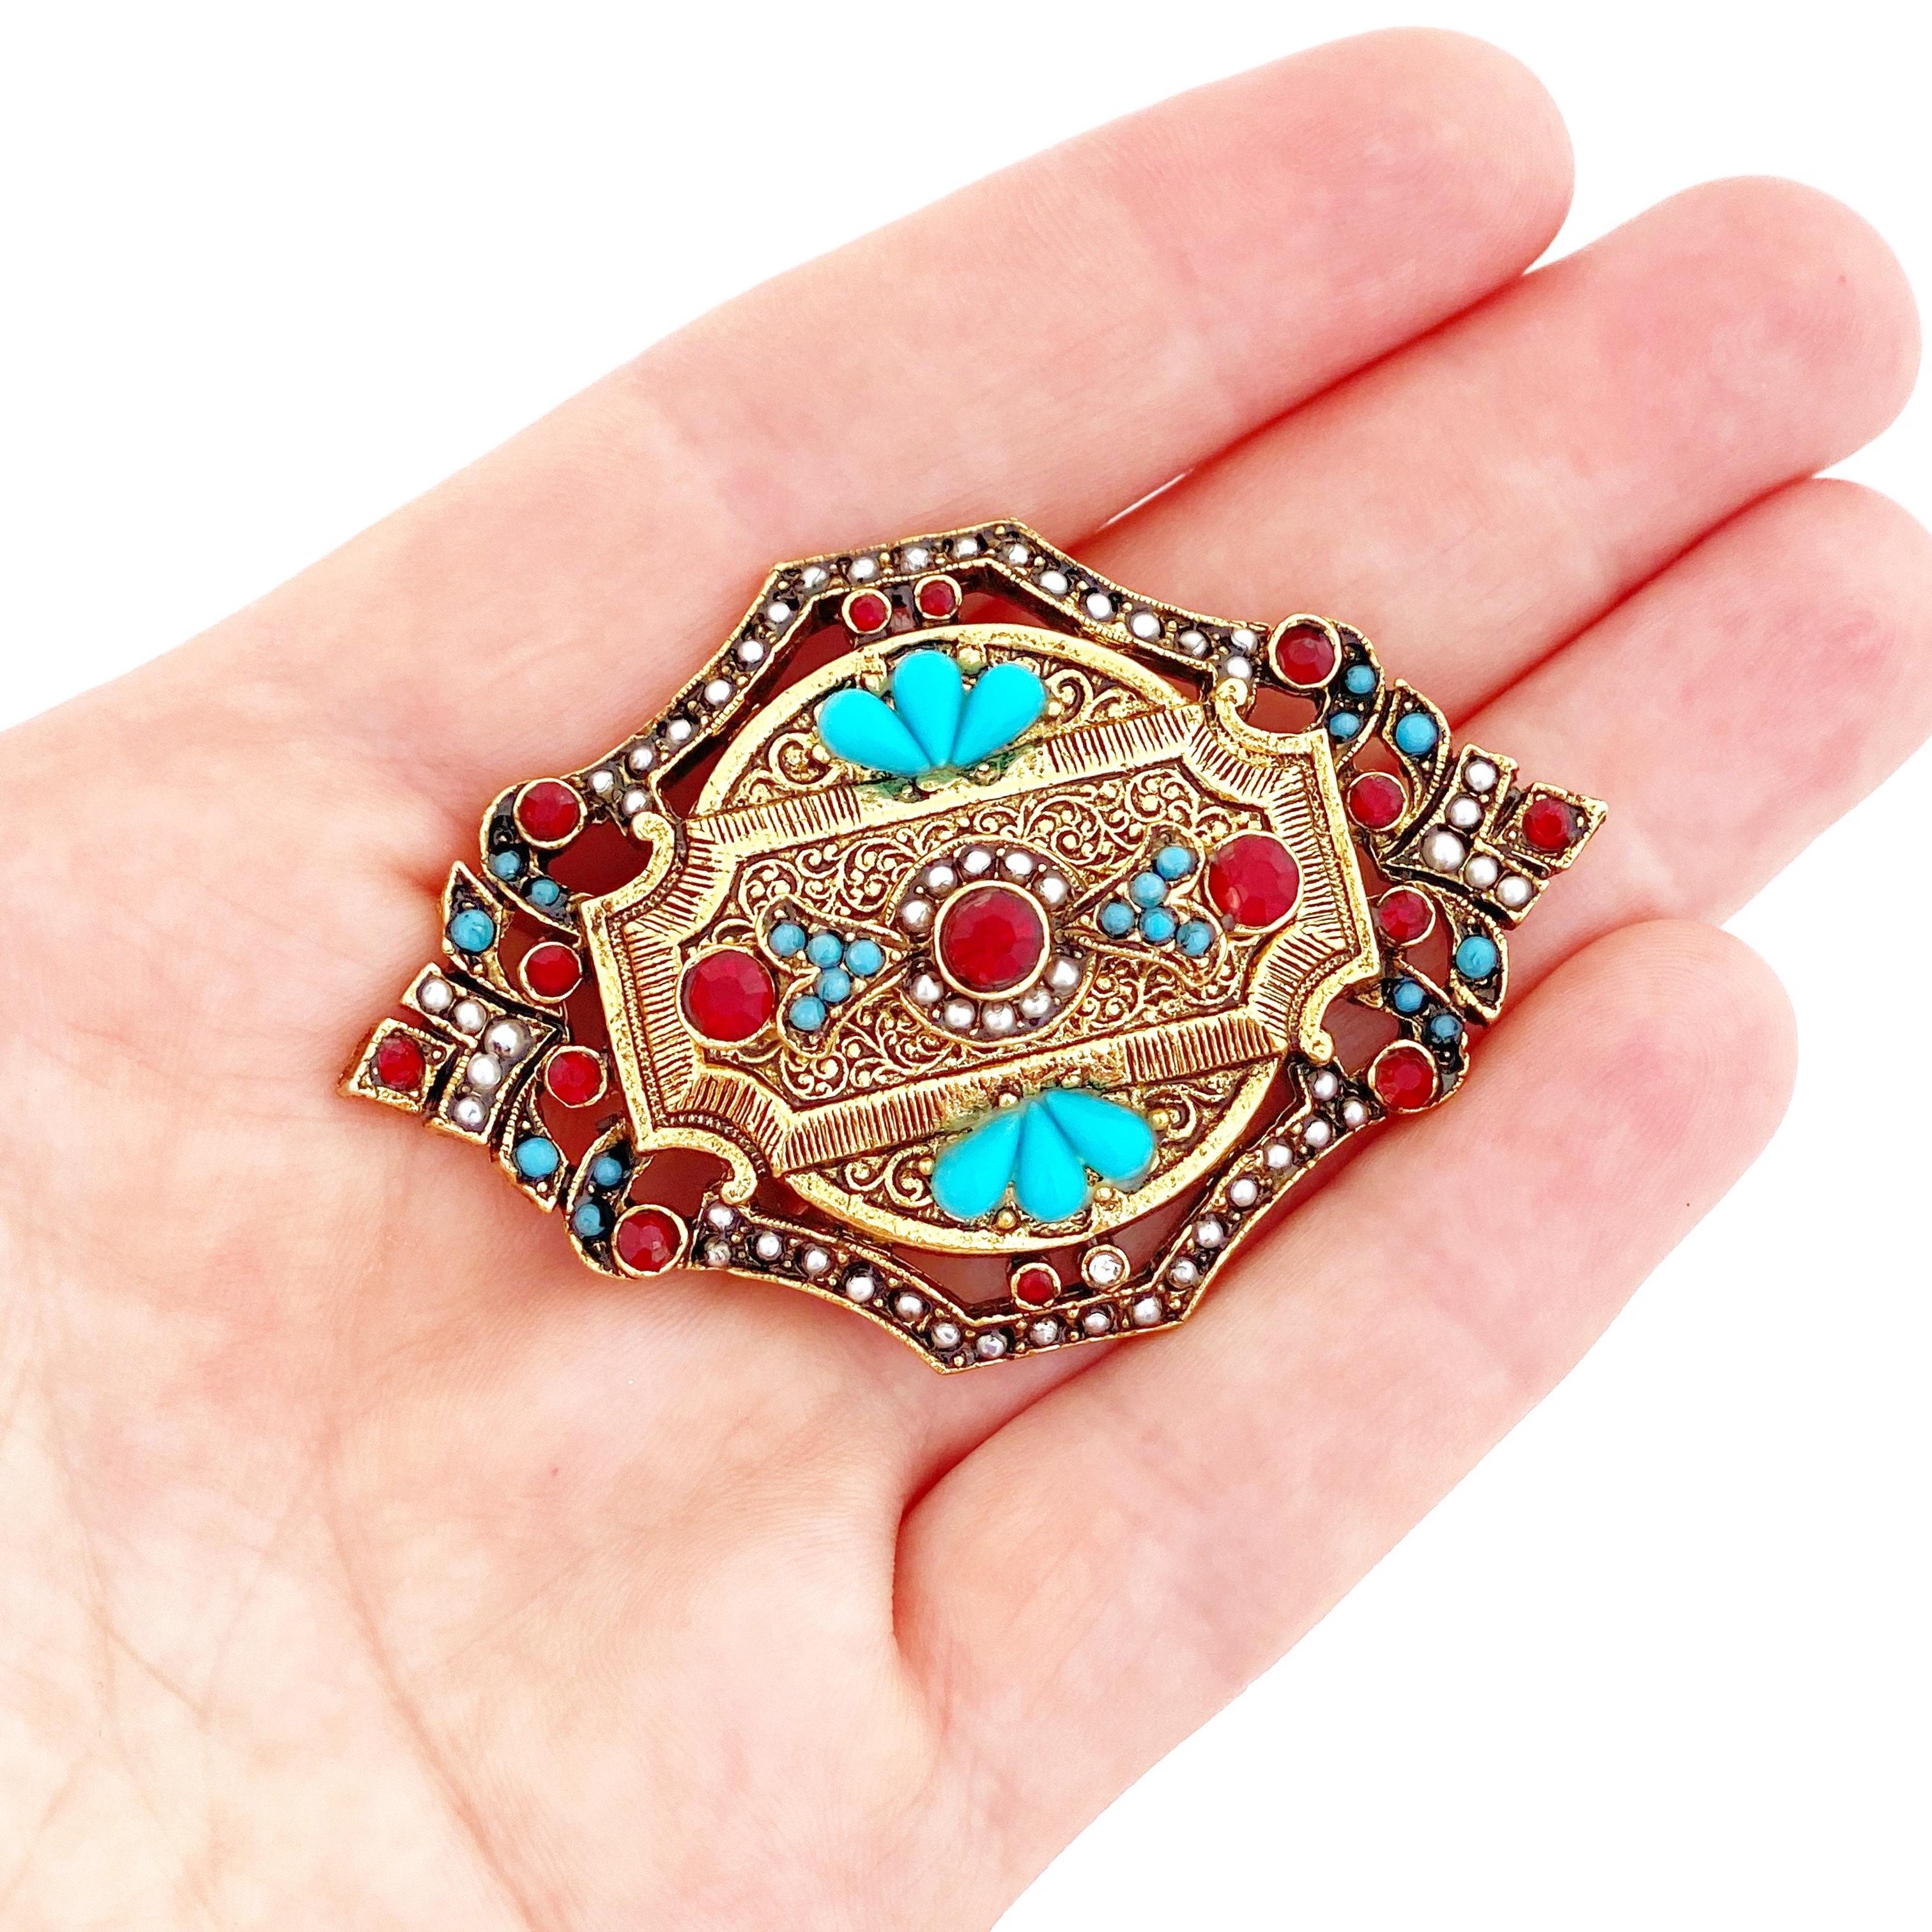 Women's Victorian Revival Ornate Brooch With Ruby Crystals & Turquoise By ModeArt, 1960s